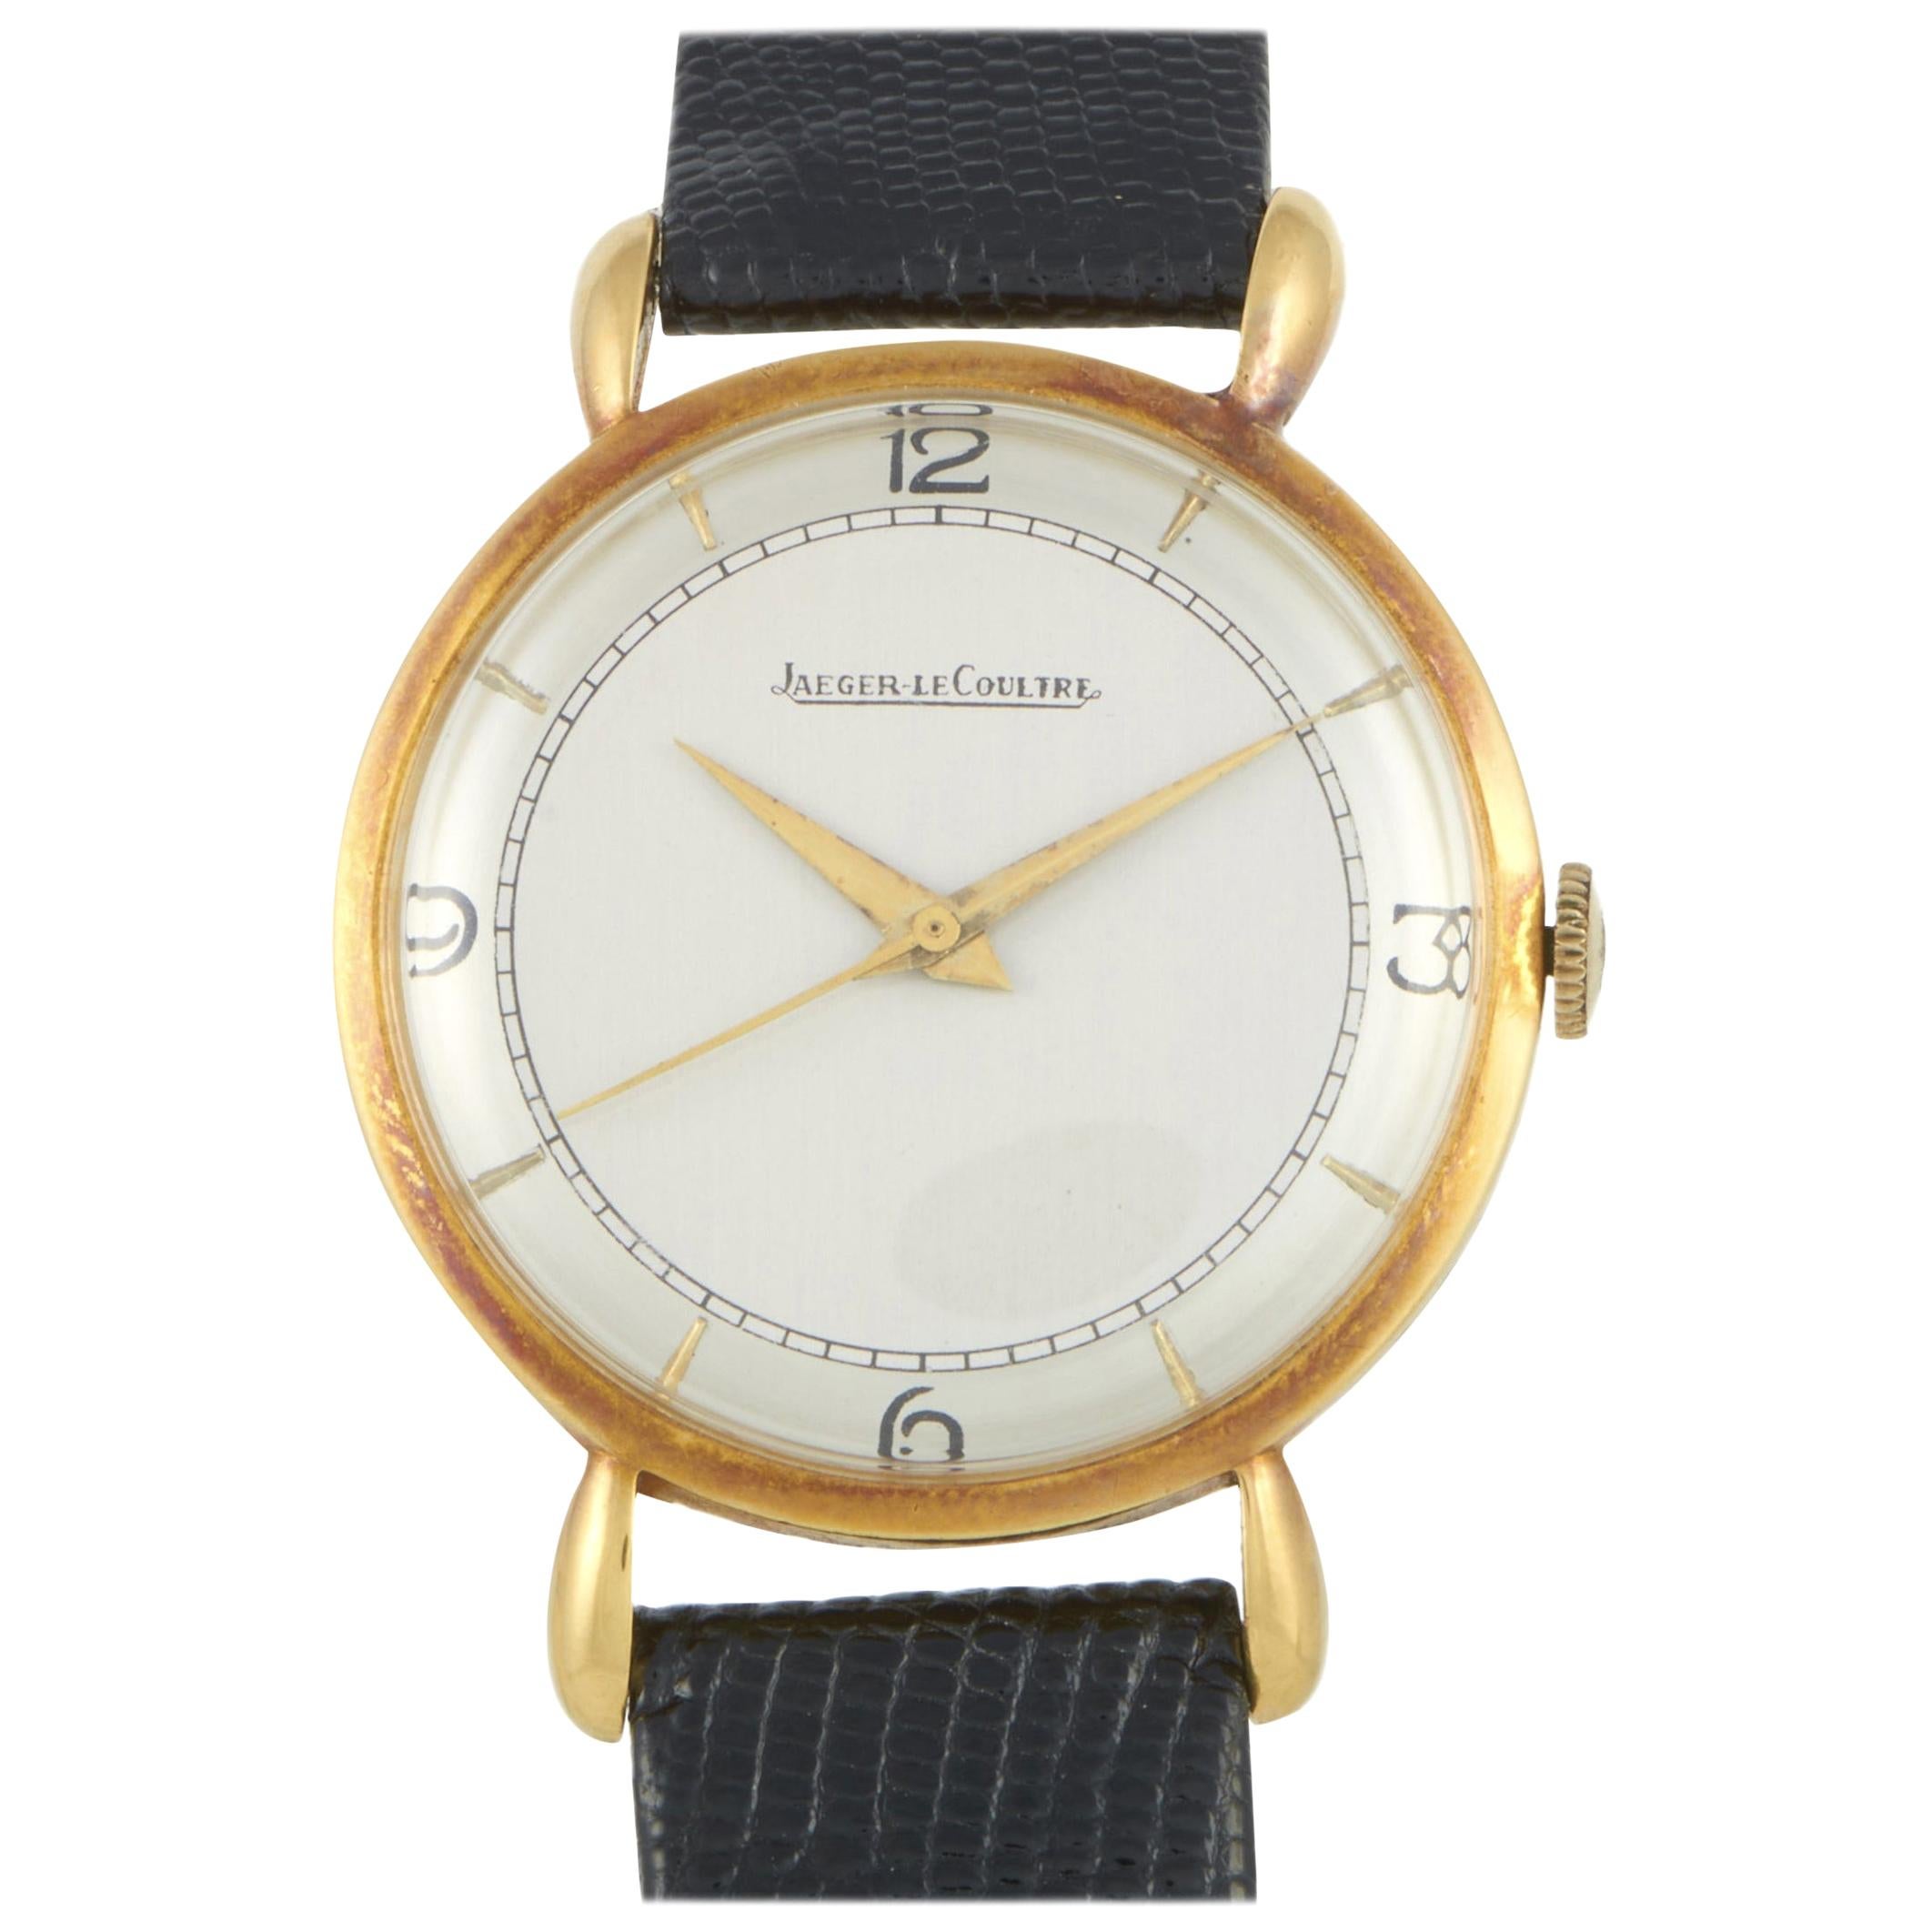 Jaeger-LeCoultre Vintage Yellow Gold Watch